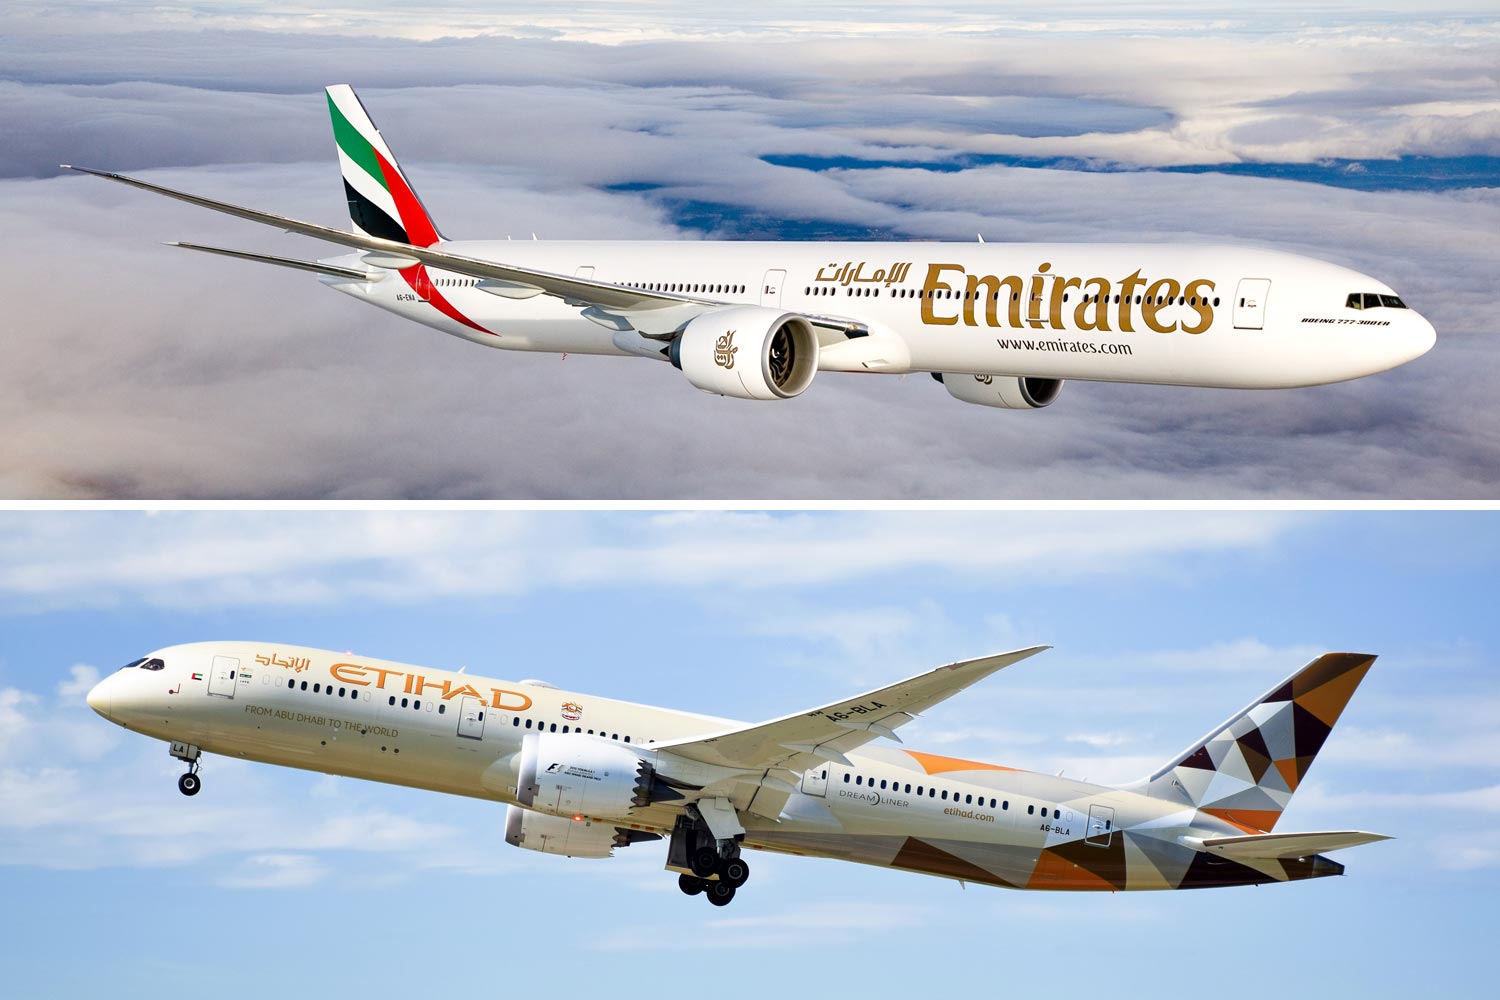 Emirates and Etihad Airways rank in the world's top 20 airlines for